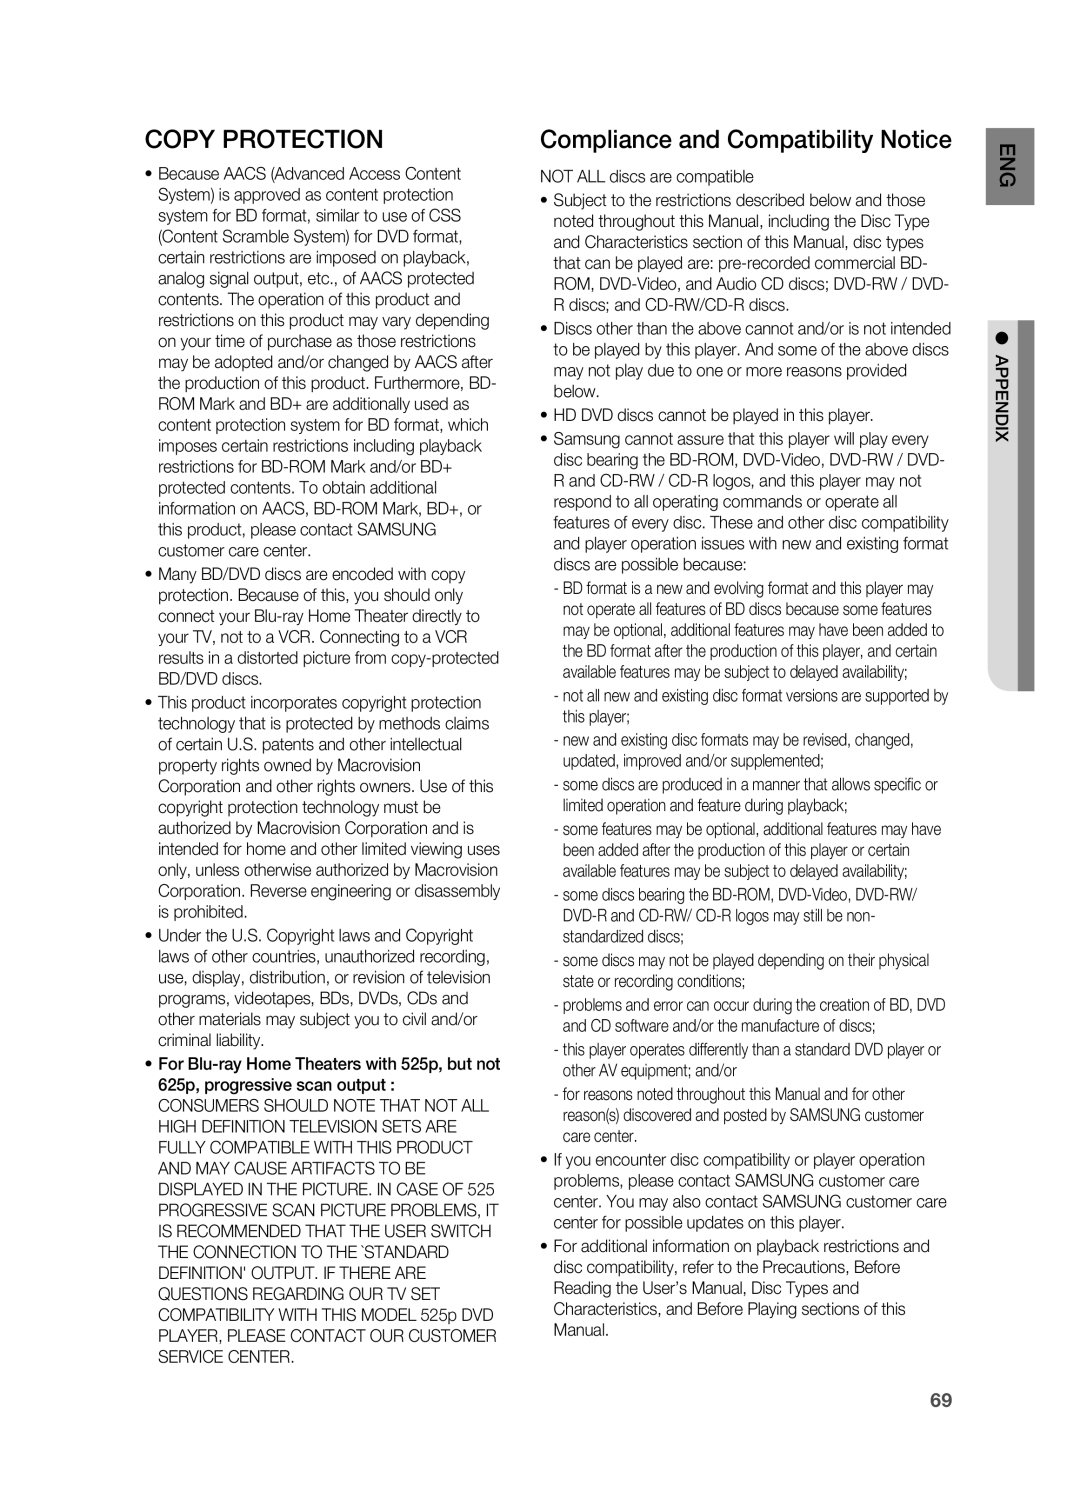 Samsung HT-BD2 manual Copy Protection, Compliance and Compatibility Notice 